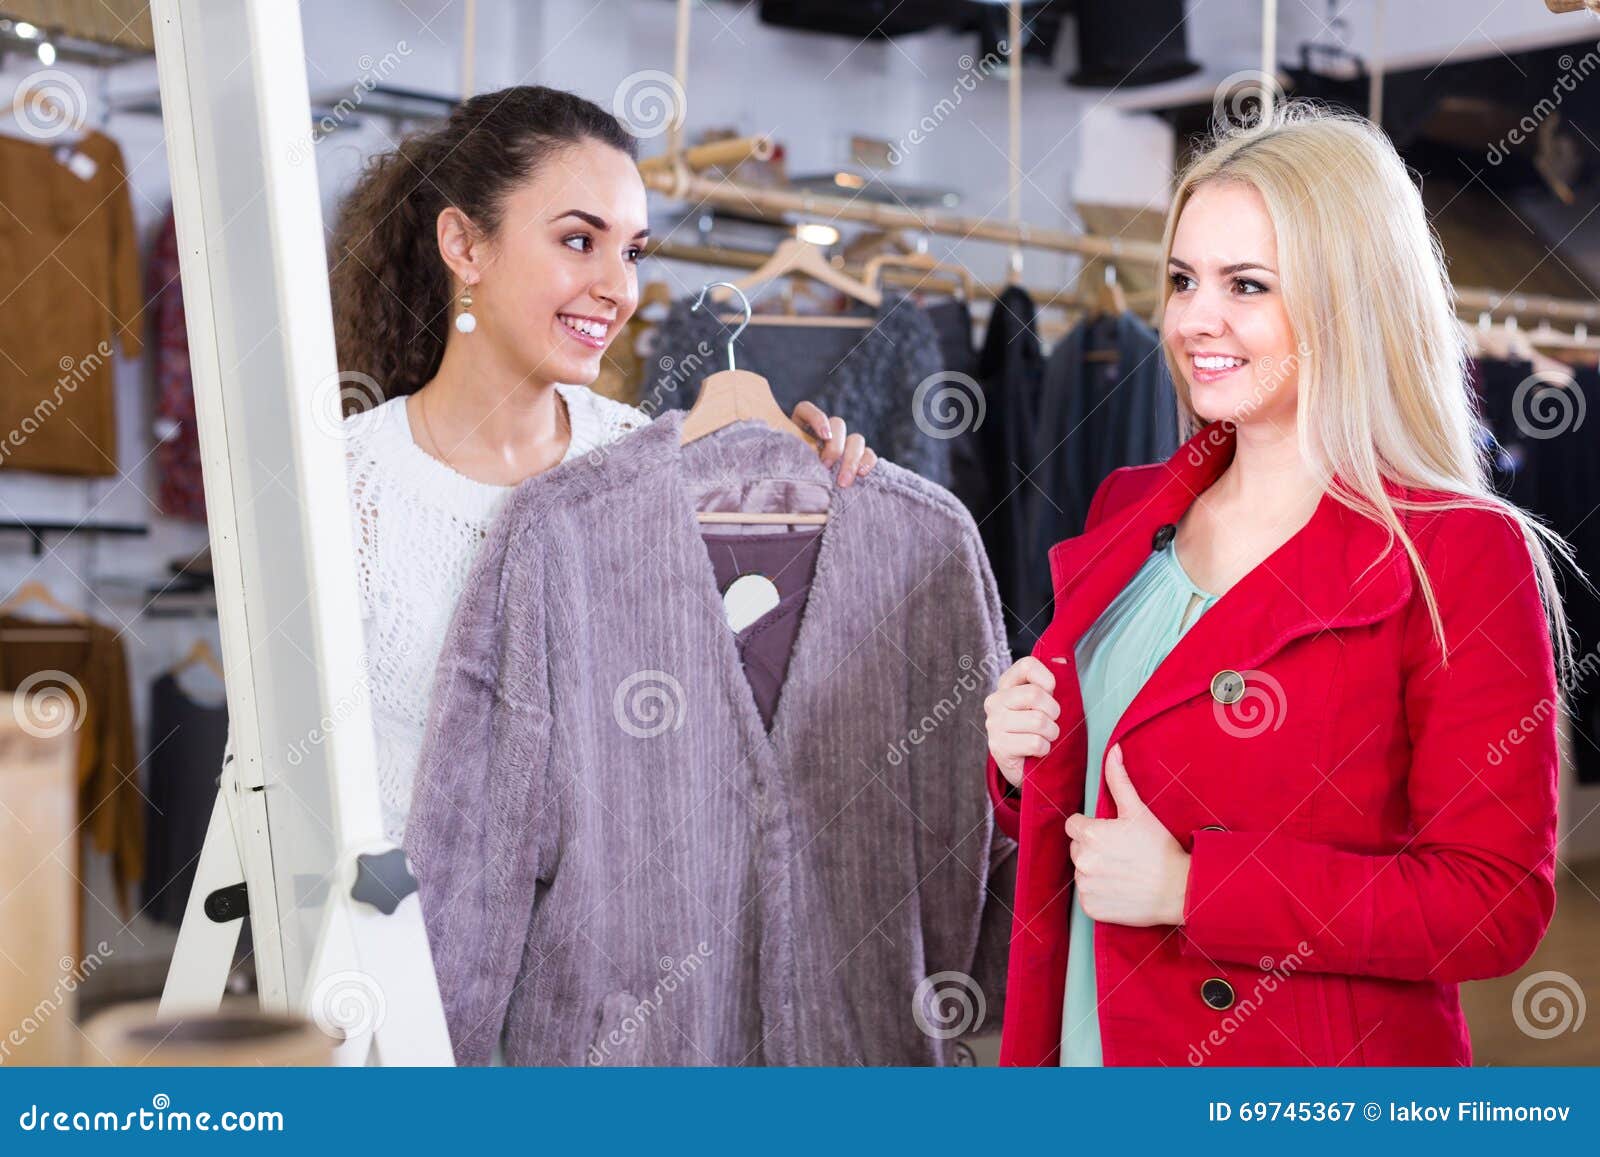 Two Girls at Clothing Store Stock Image - Image of assortment, american ...